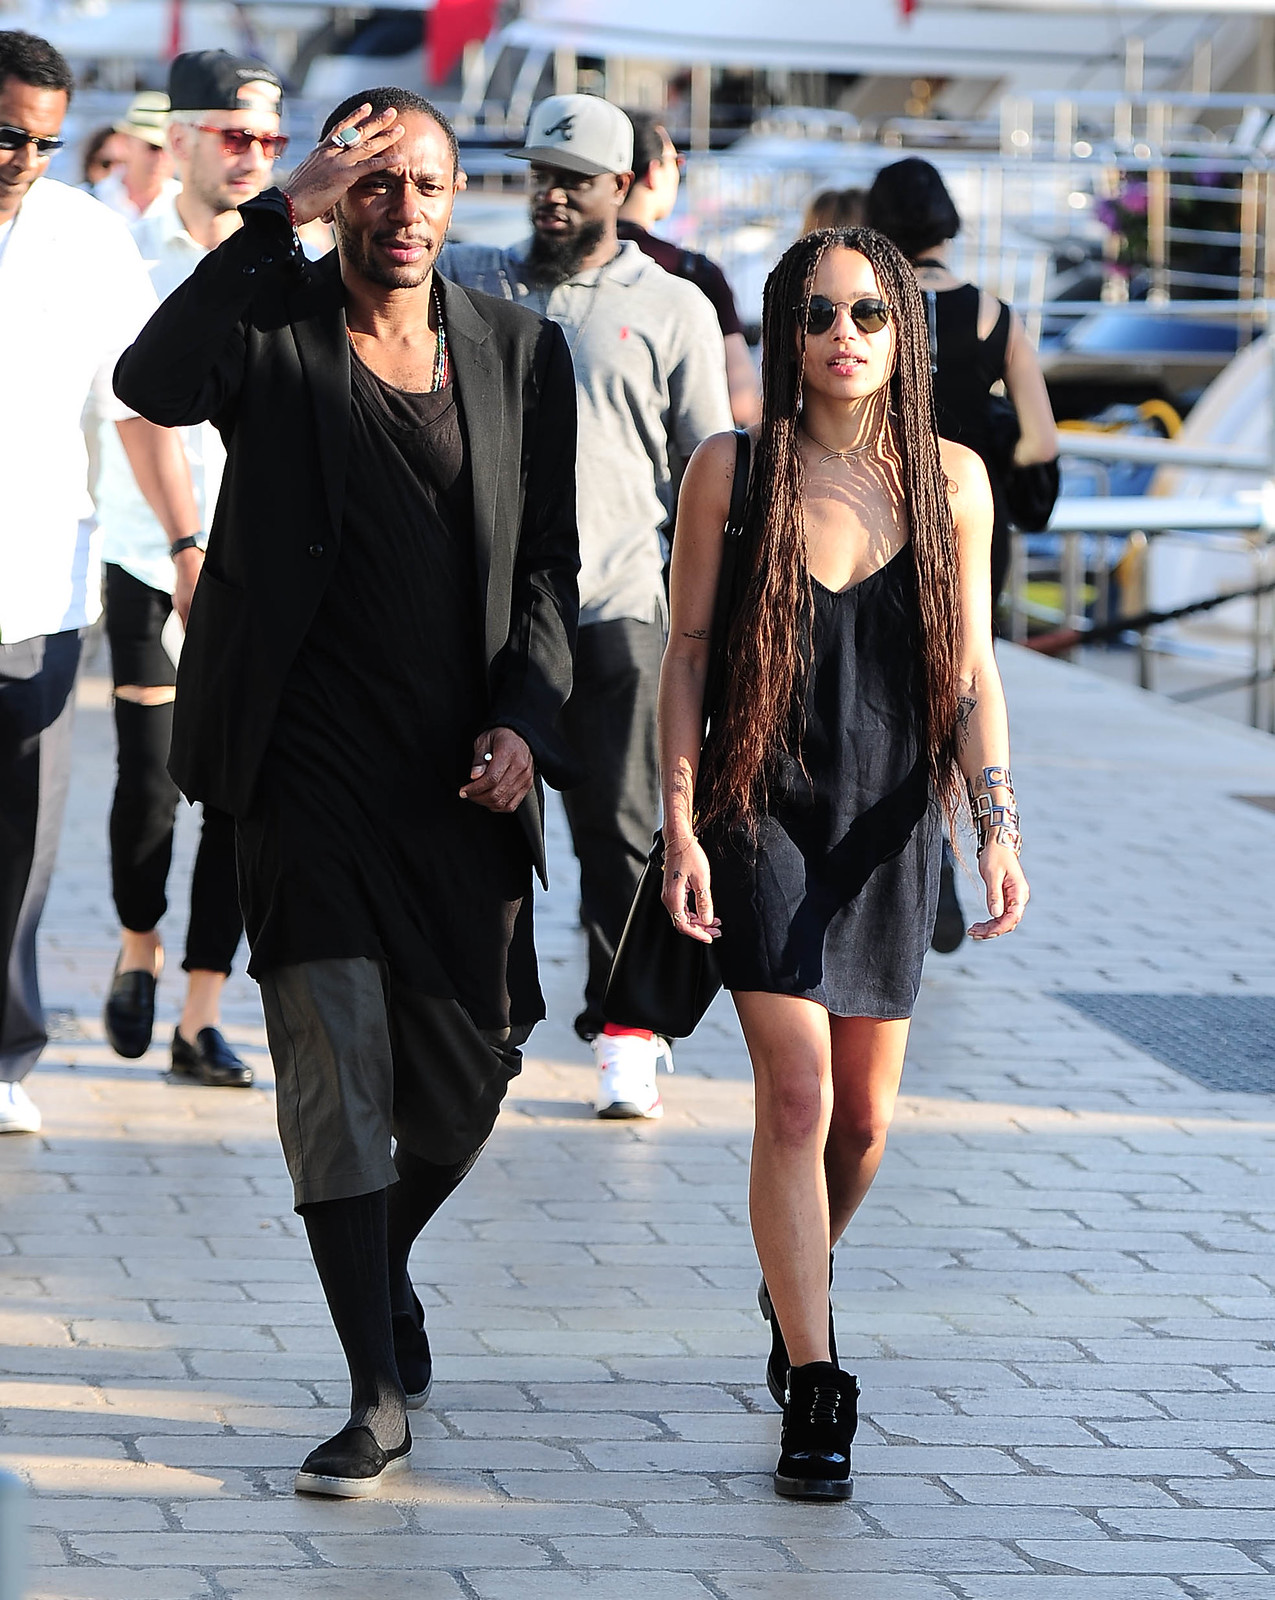 Zoë Kravitz and Yasiin Bey (Mos Def Official)